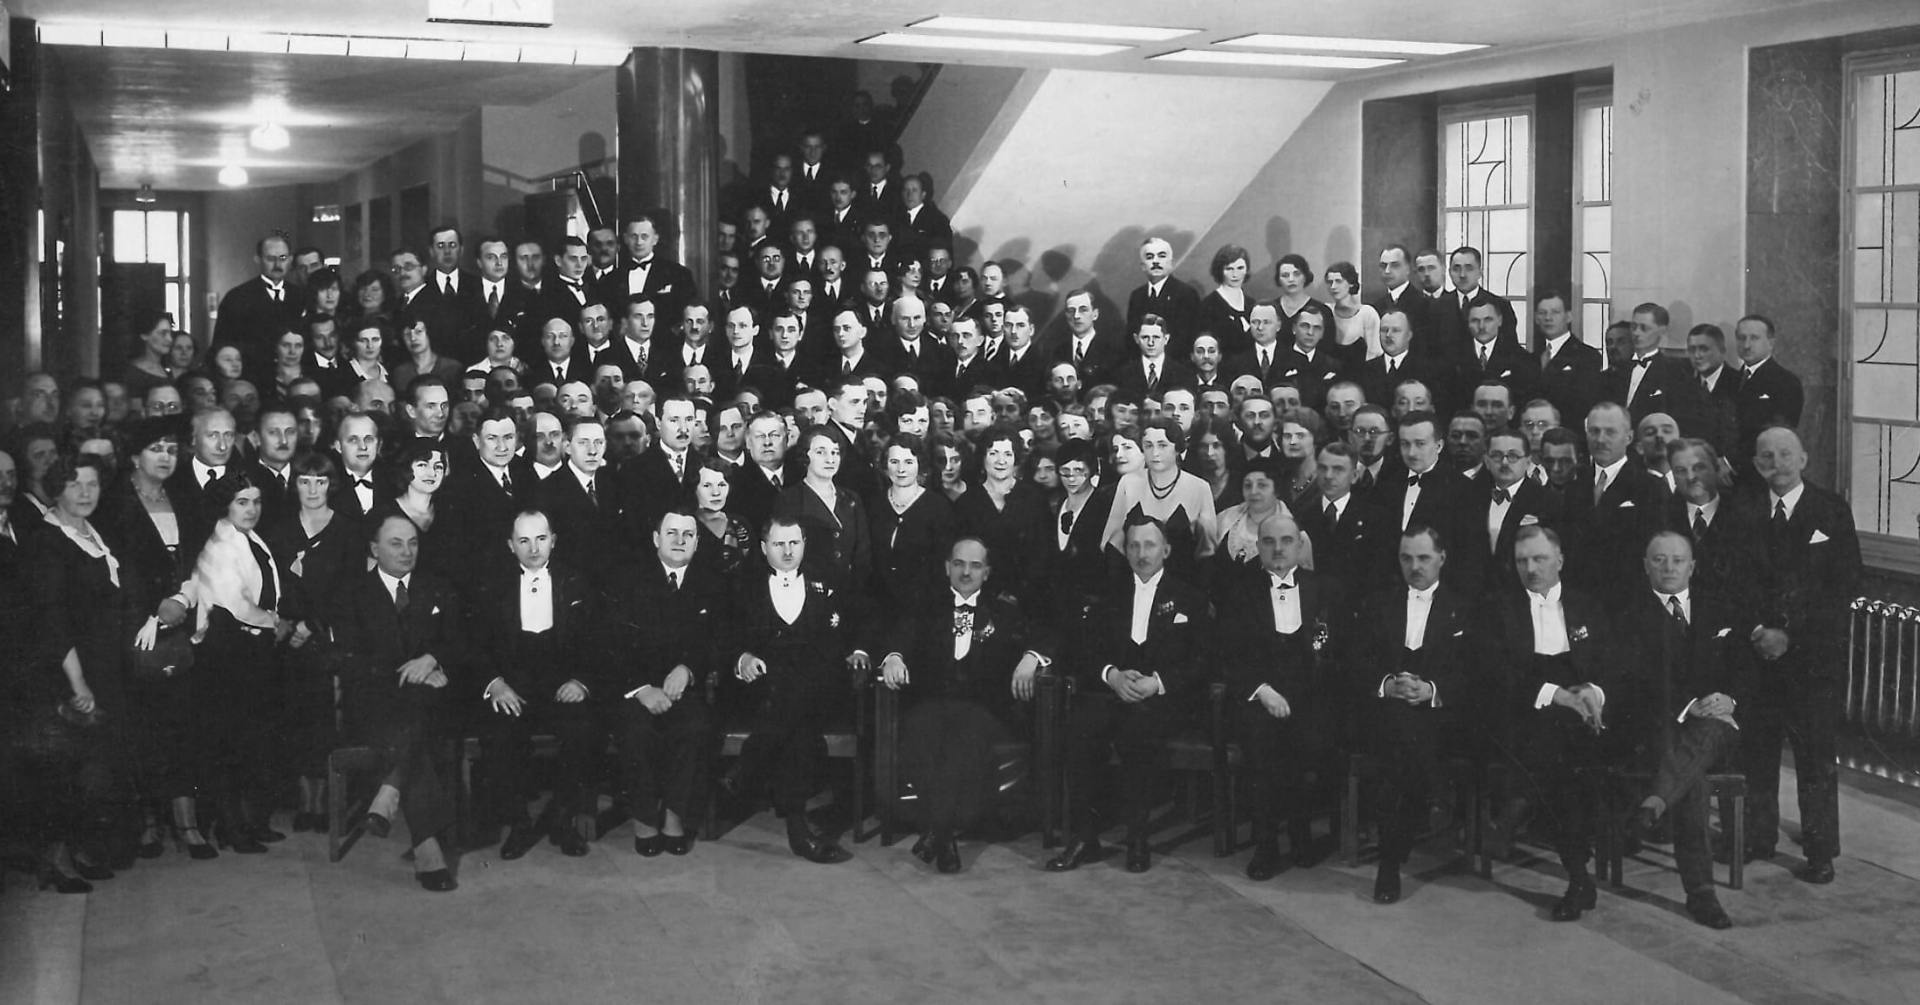 New Year's Eve in the BGK building, 4th from the left in the 1st row is vice-president of BGK S. Starzyński, 1933